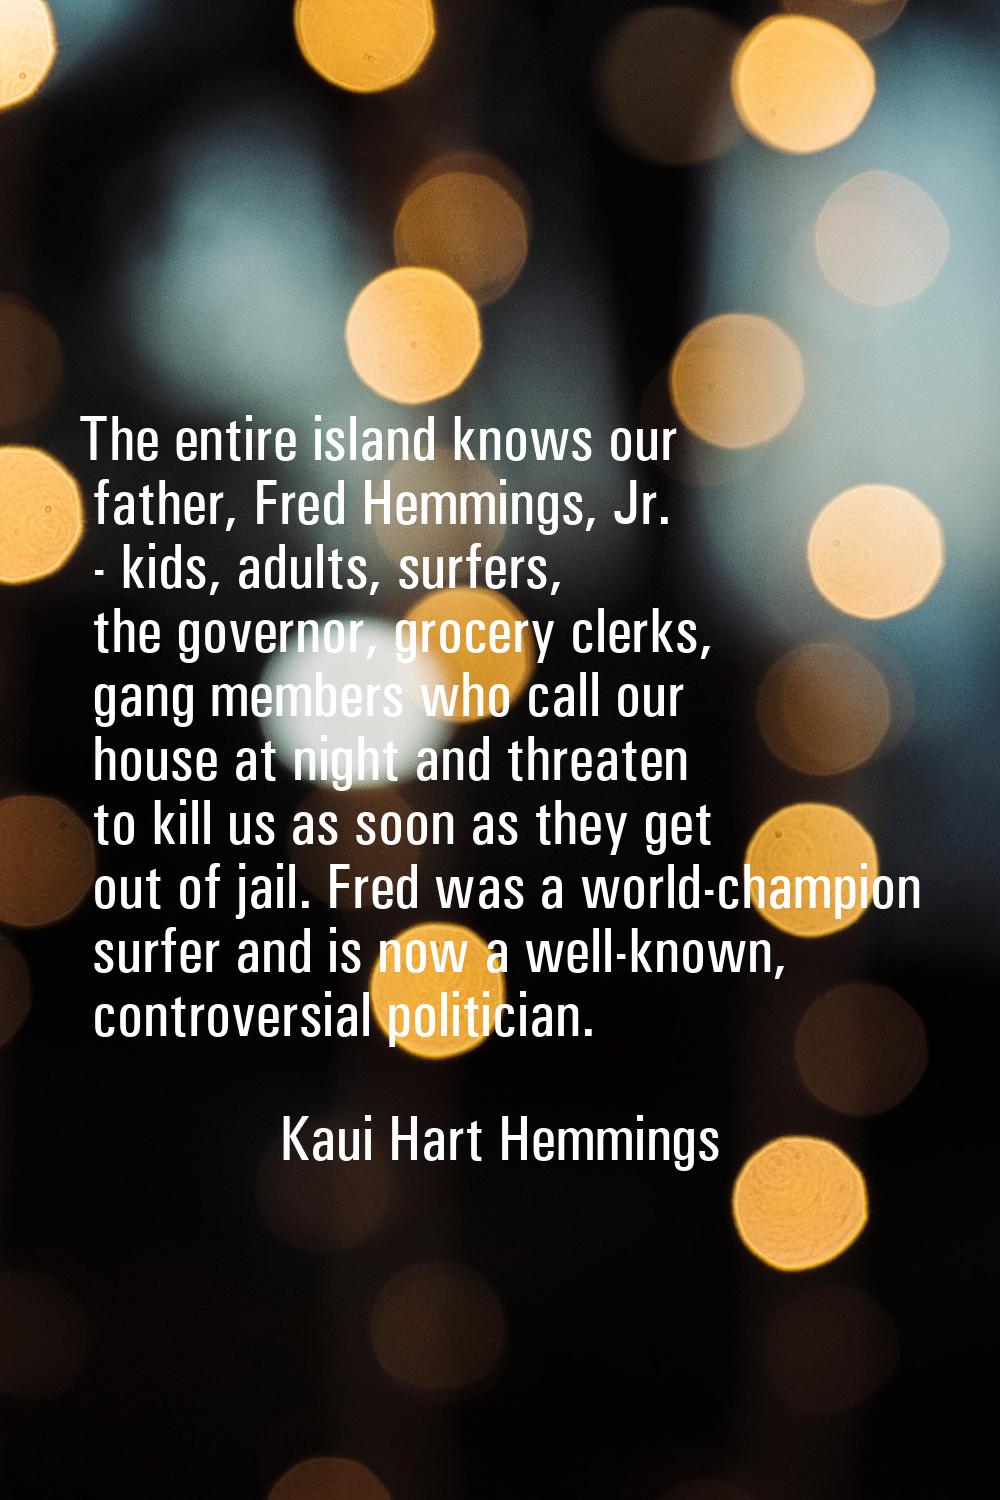 The entire island knows our father, Fred Hemmings, Jr. - kids, adults, surfers, the governor, groce